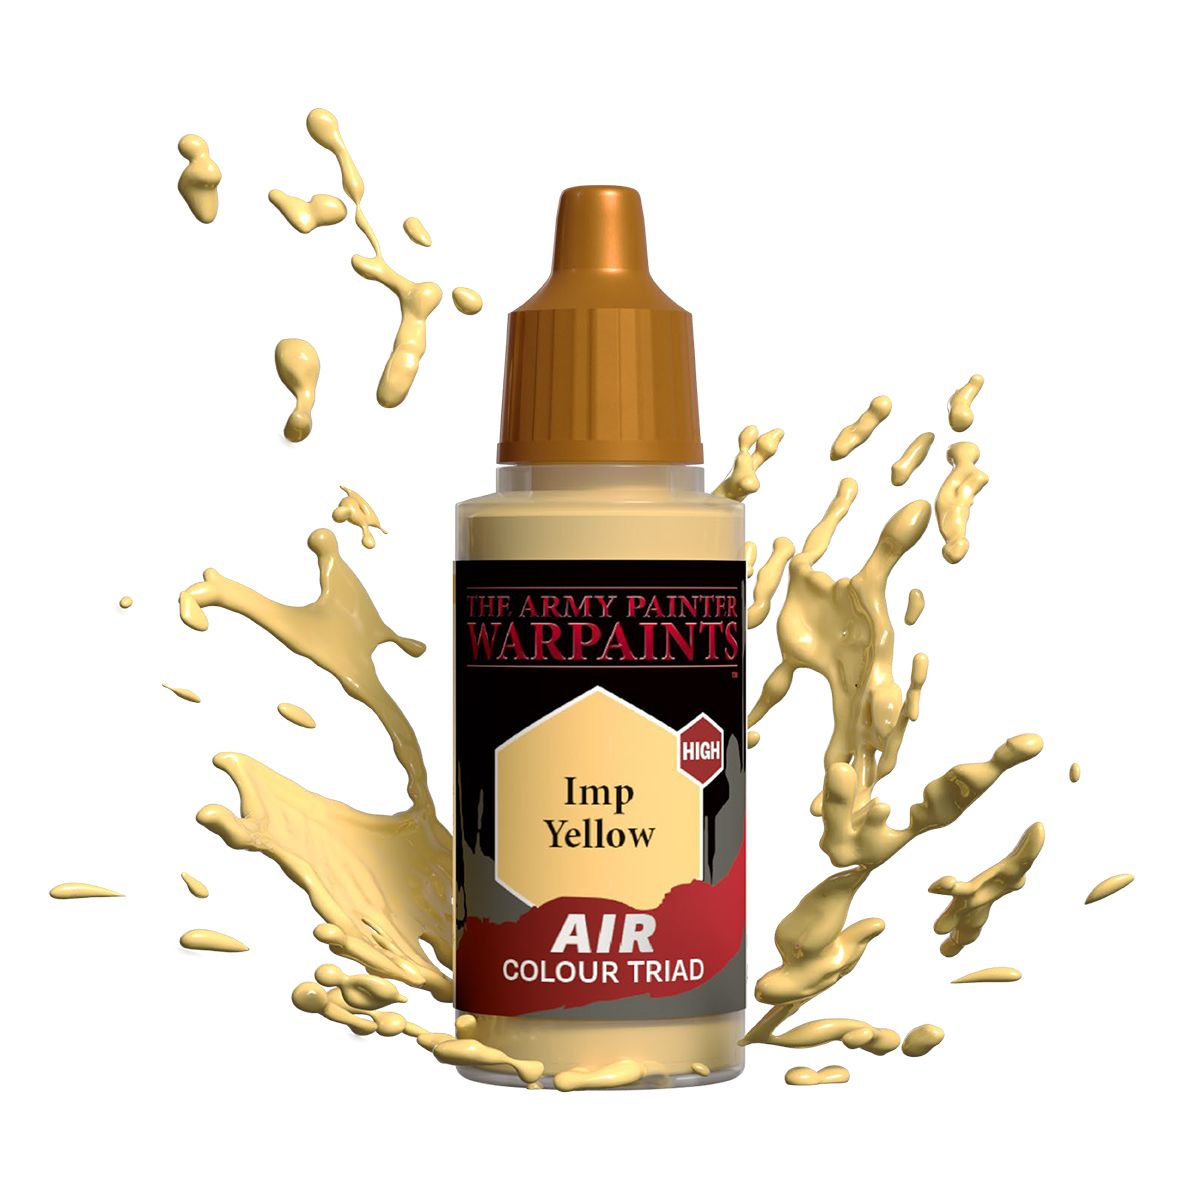 Army Painter Warpaint Air -  Imp Yellow (18ml) - Loaded Dice